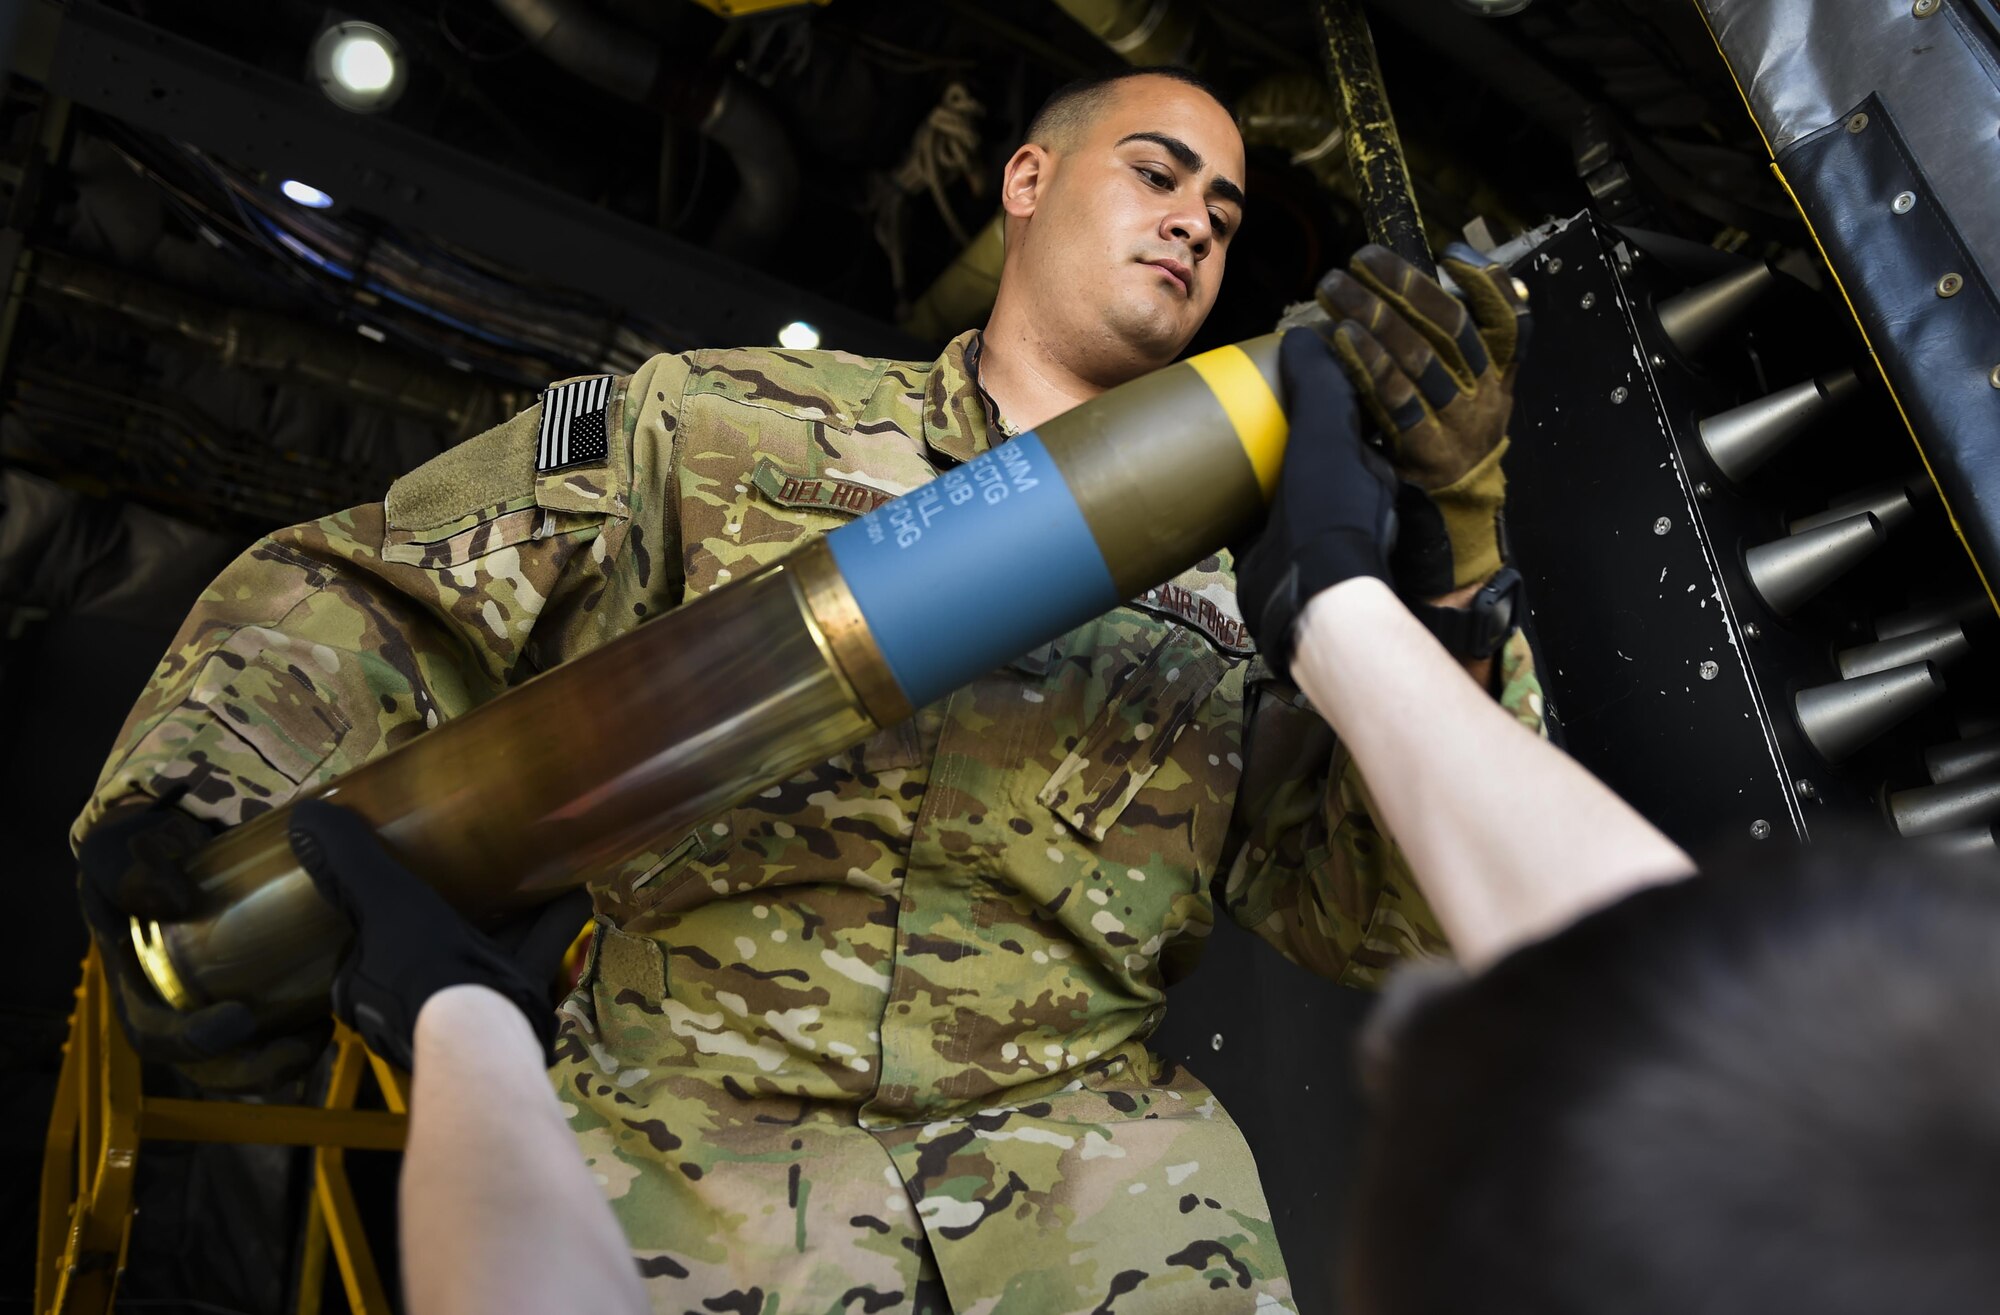 Staff Sgt. Joseph Del Hoyo, a special missions aviator with the 4th Special Operations Squadron, takes control of a 105 mm round at Hurlburt Field, Fla., April 17, 2017. Aircrew with the 4th SOS conducted a live-fire training mission to ensure mission readiness any time, any place. (U.S. Air Force photo by Airman 1st Class Joseph Pick)